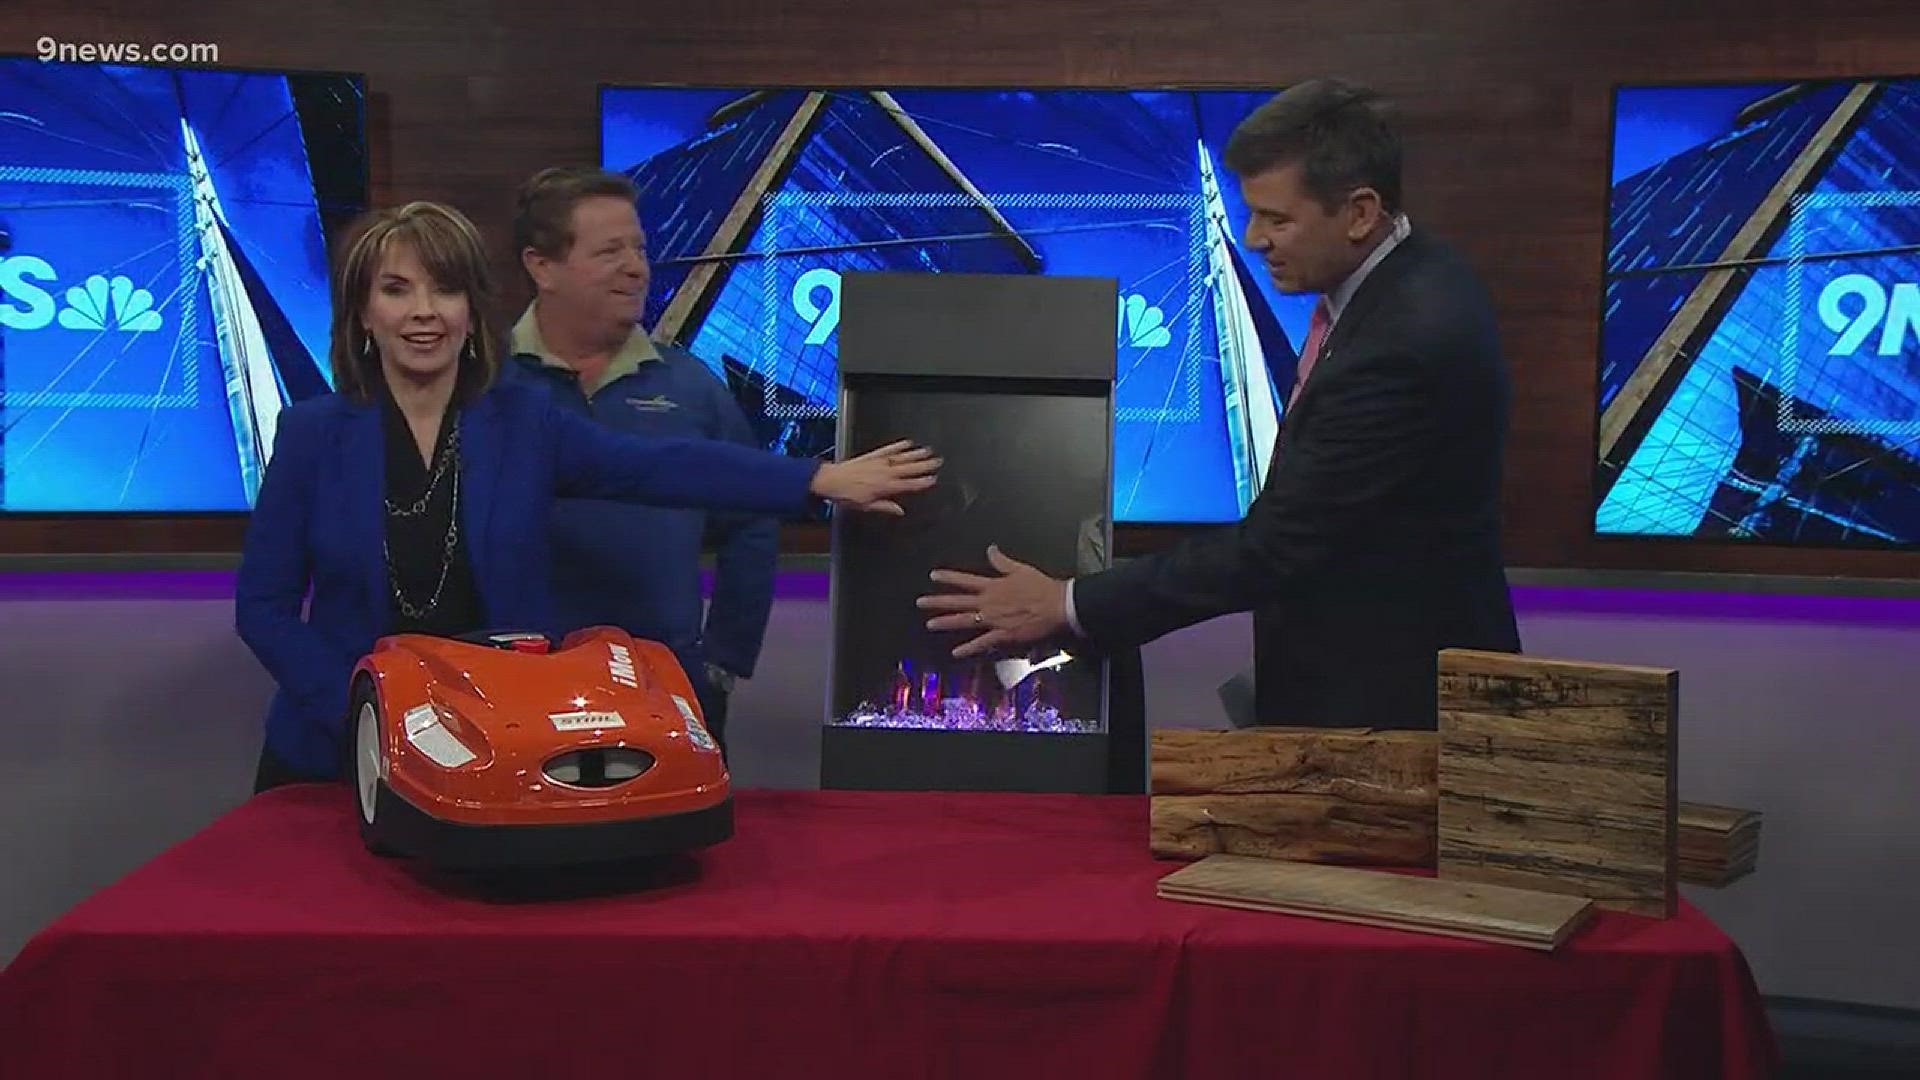 Jim Fricke, executive director of the Colorado Garden Foundation, joined us with some of the cool products you can see at the Colorado Convention Center this weekend.